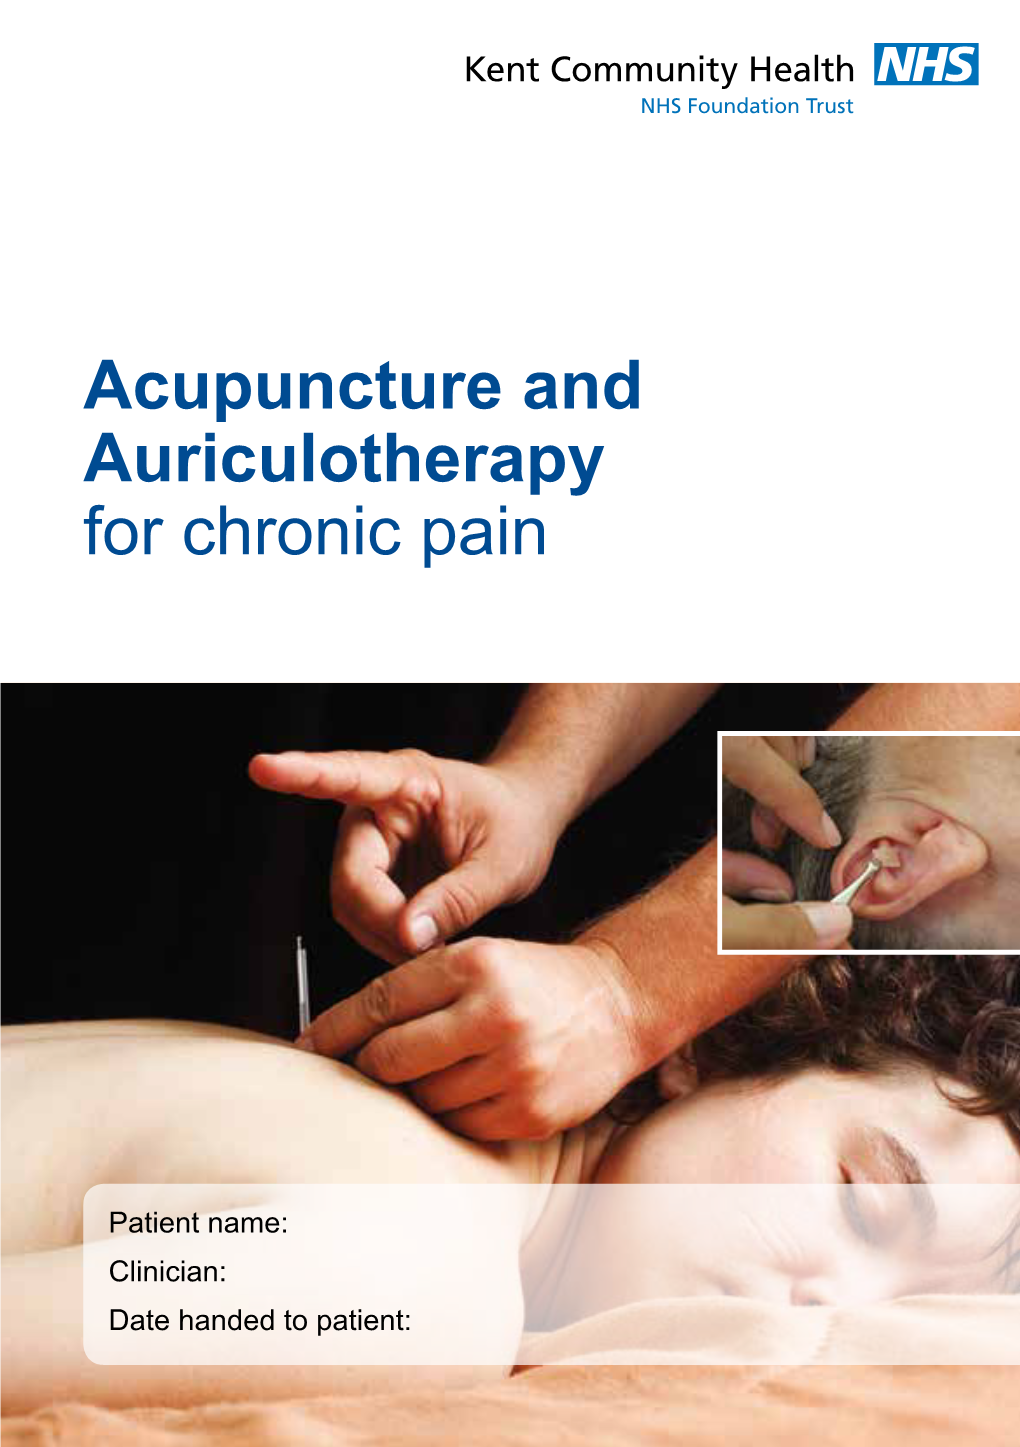 Acupuncture and Auriculotherapy for Chronic Pain